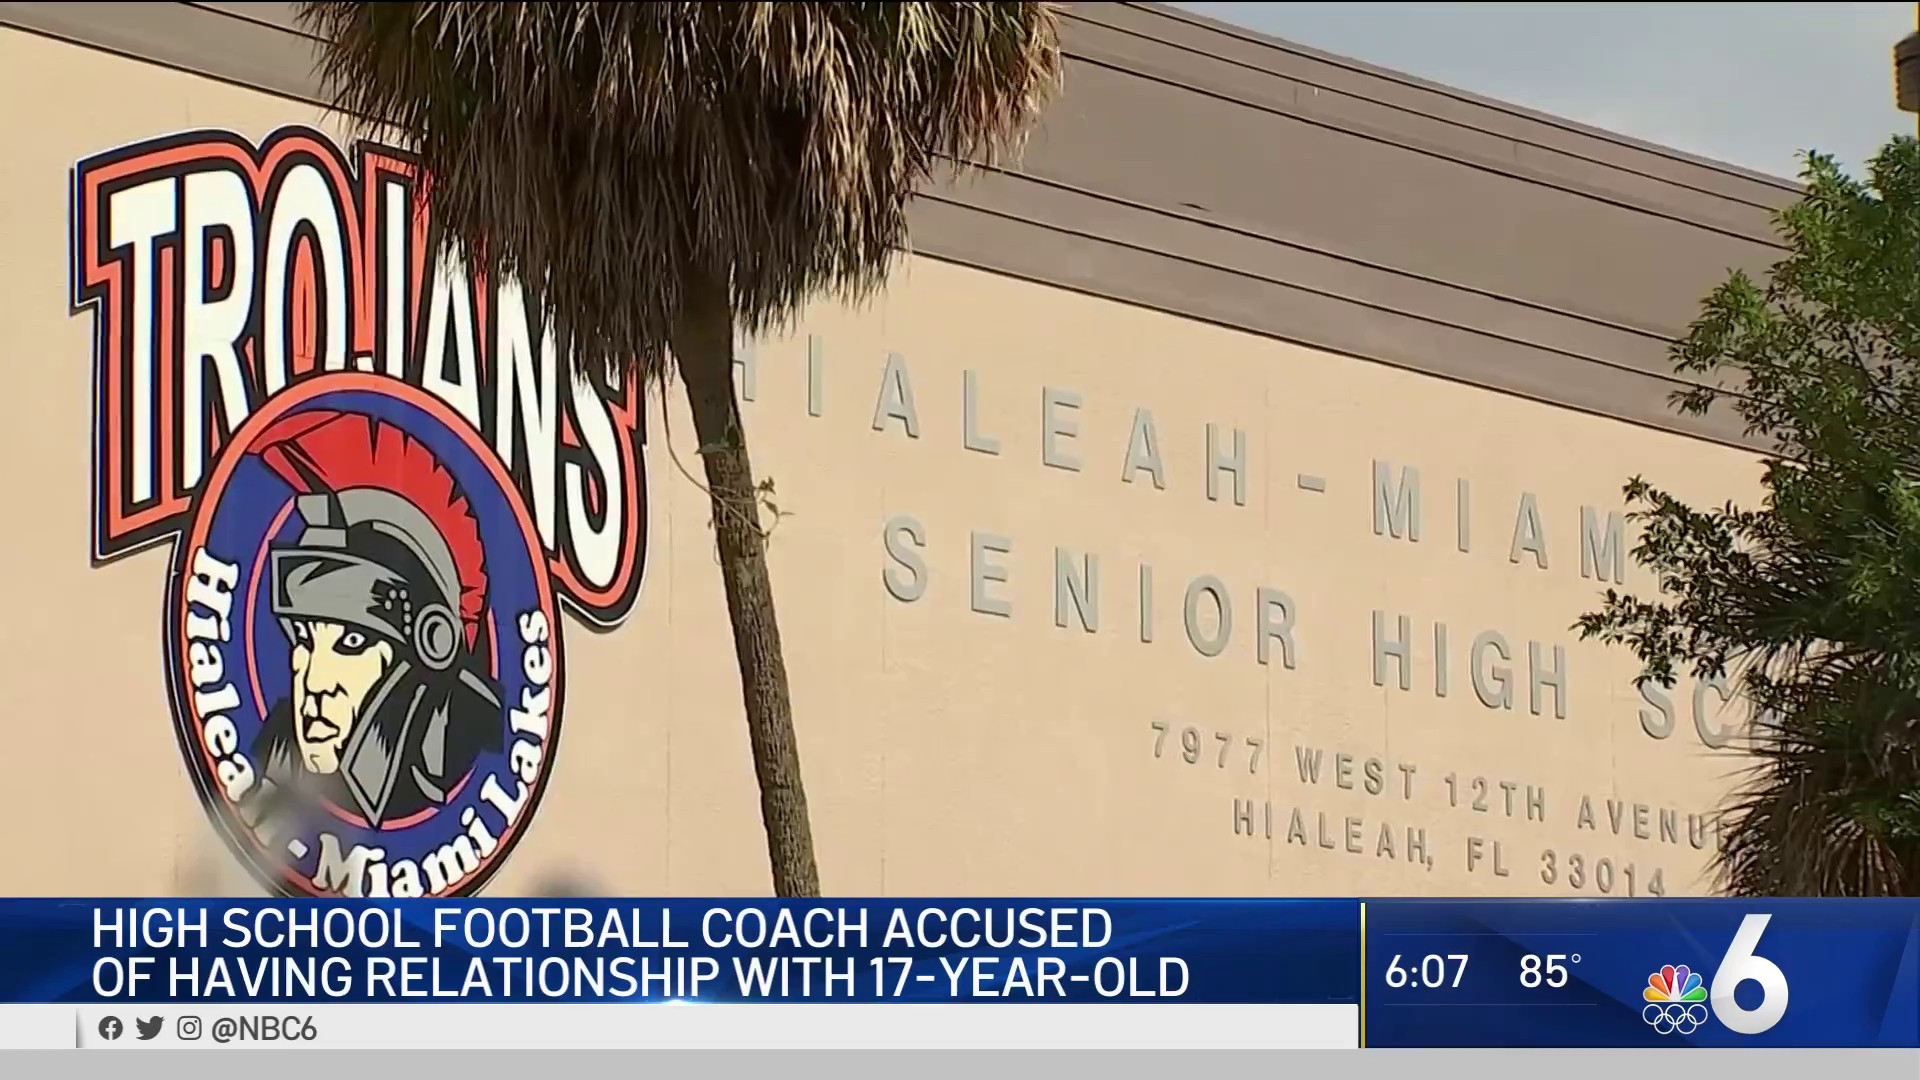 Hialeah-Miami Lakes High School Football Coach Accused of Relationship With  Teen – NBC 6 South Florida